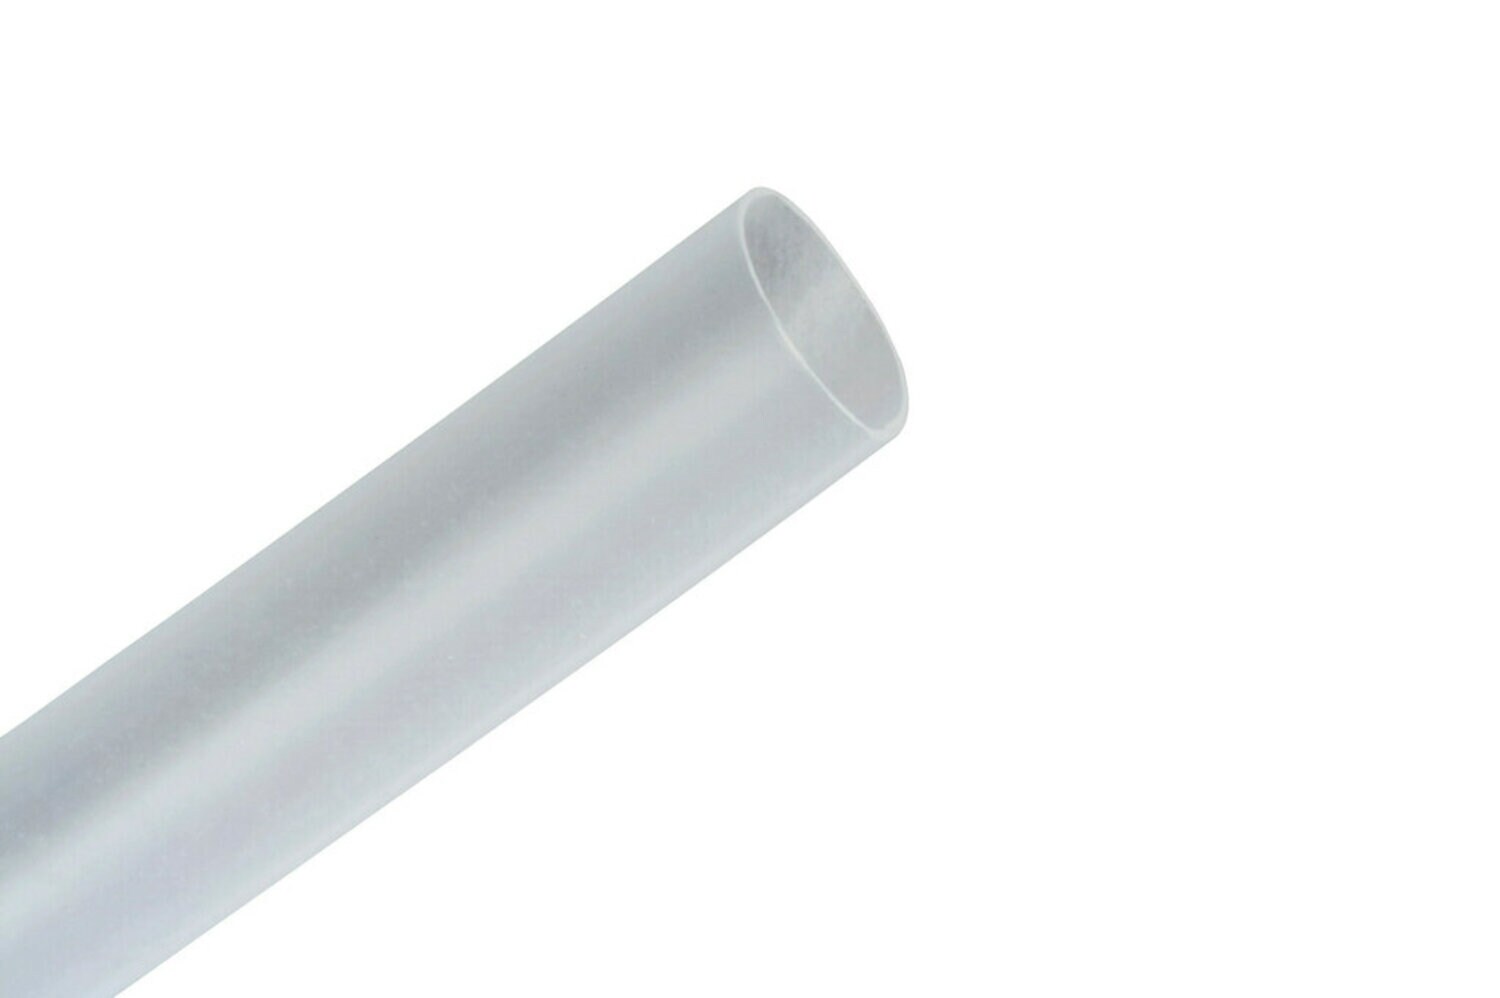 https://www.e-aircraftsupply.com/ItemImages/83/583039E_3mtm-thin-wall-tubing-fp-301-heat-shrink-clear.jpg